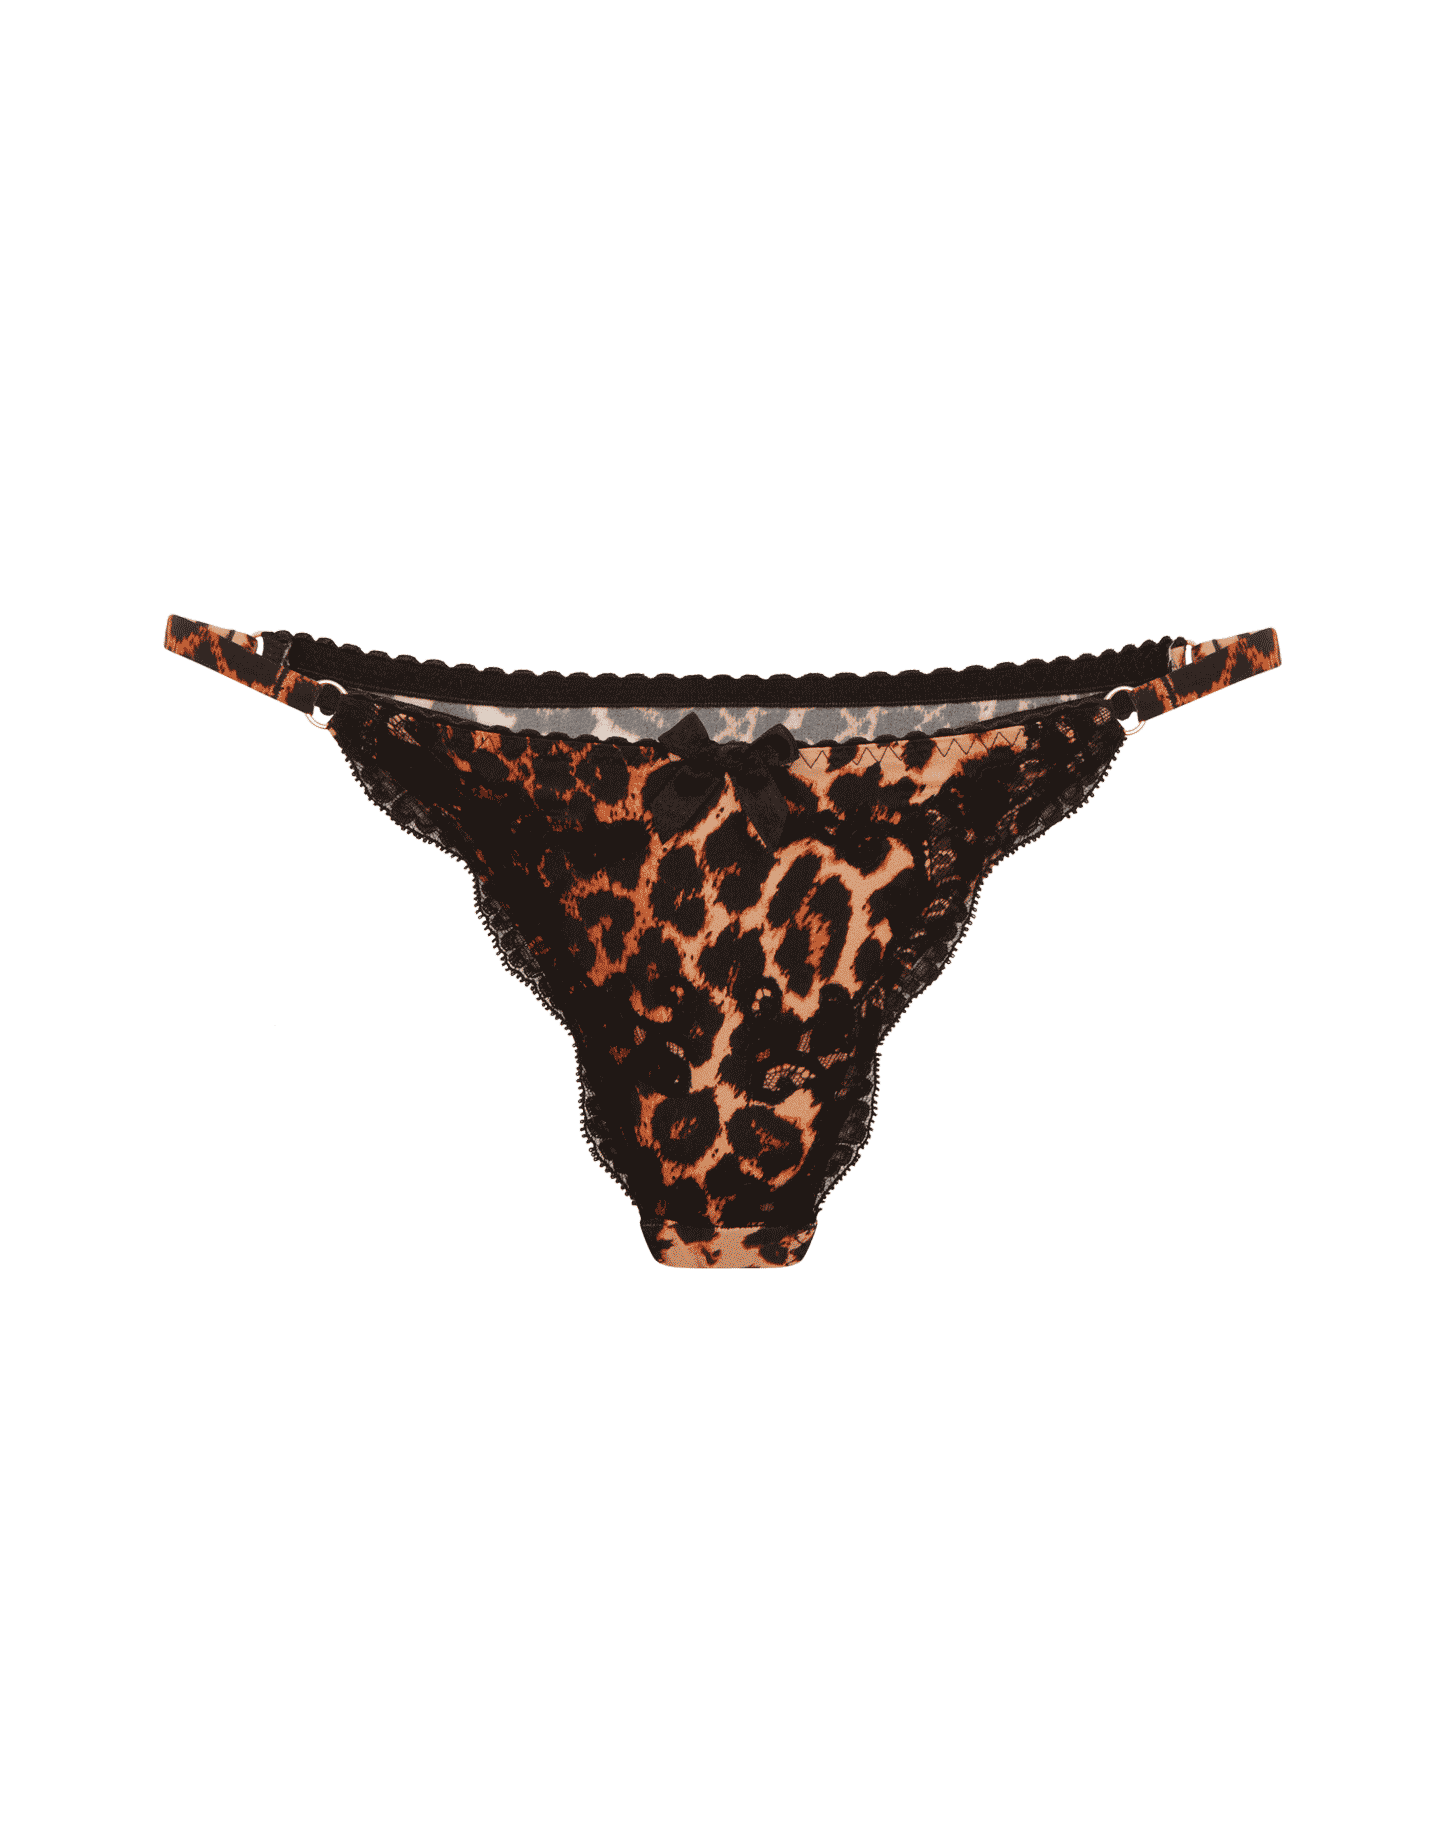 Molly Thong in Leopard | Agent Provocateur All Lingerie